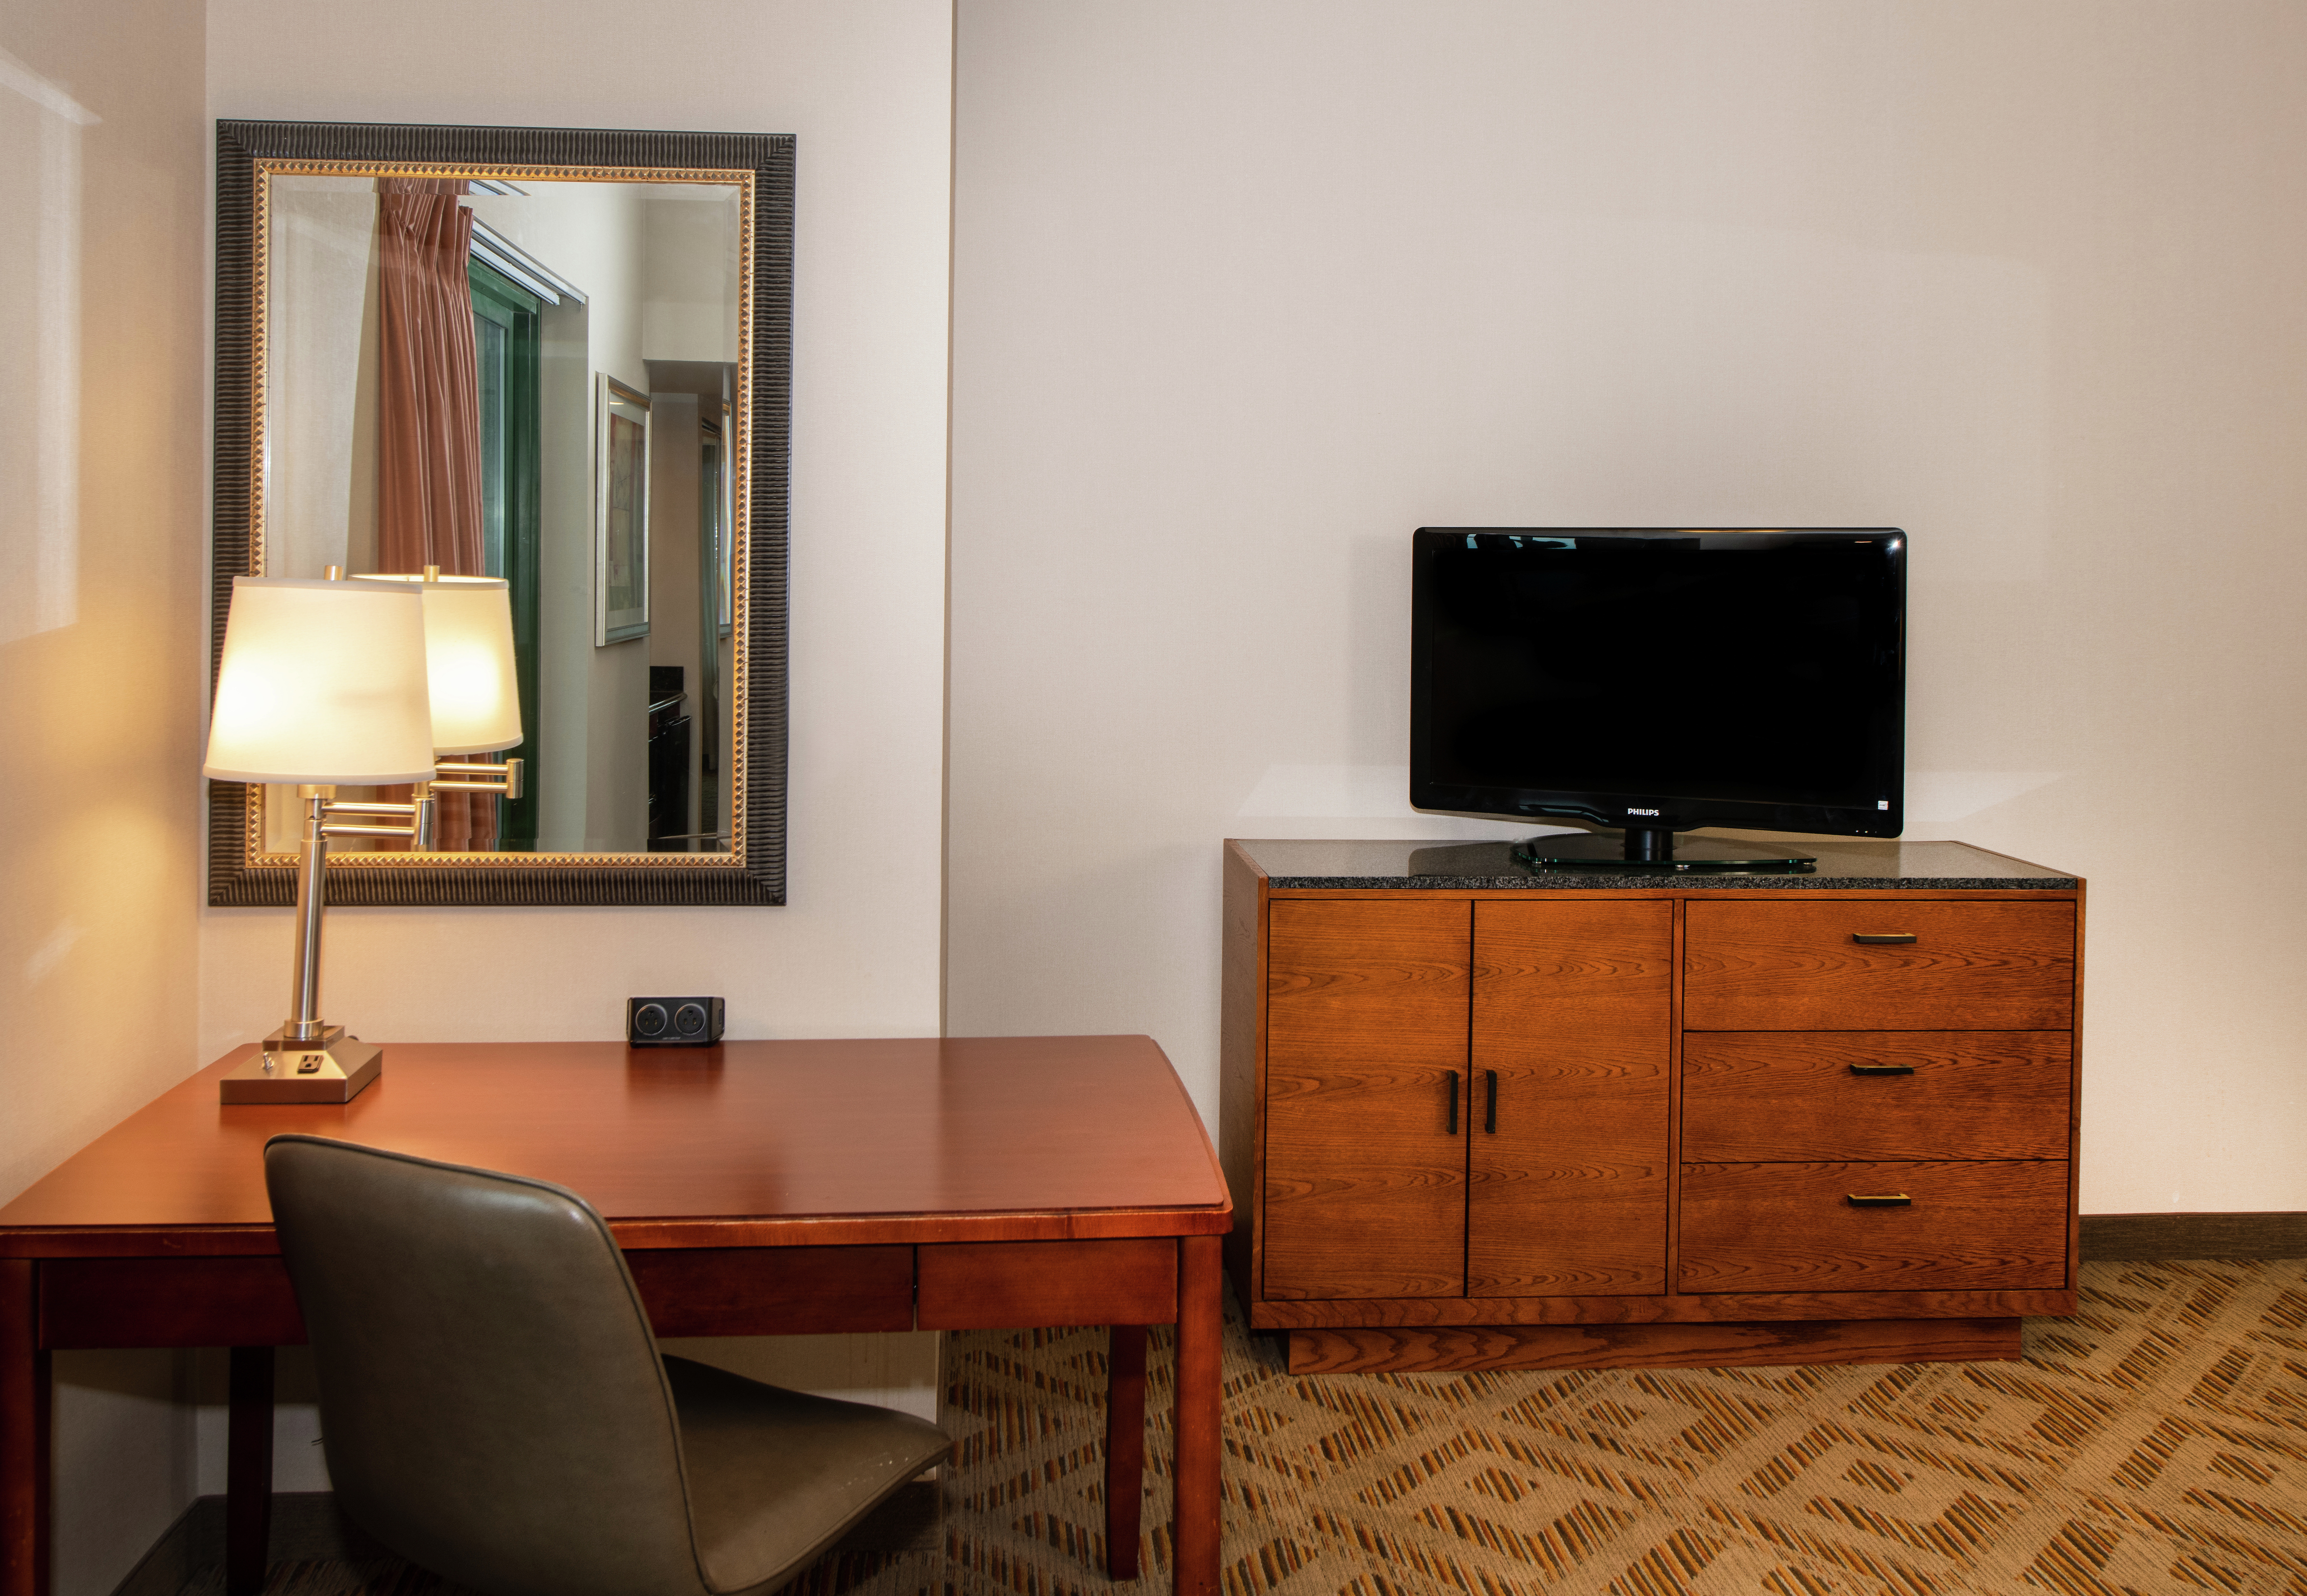 Executive suite features a separate living room and work area.